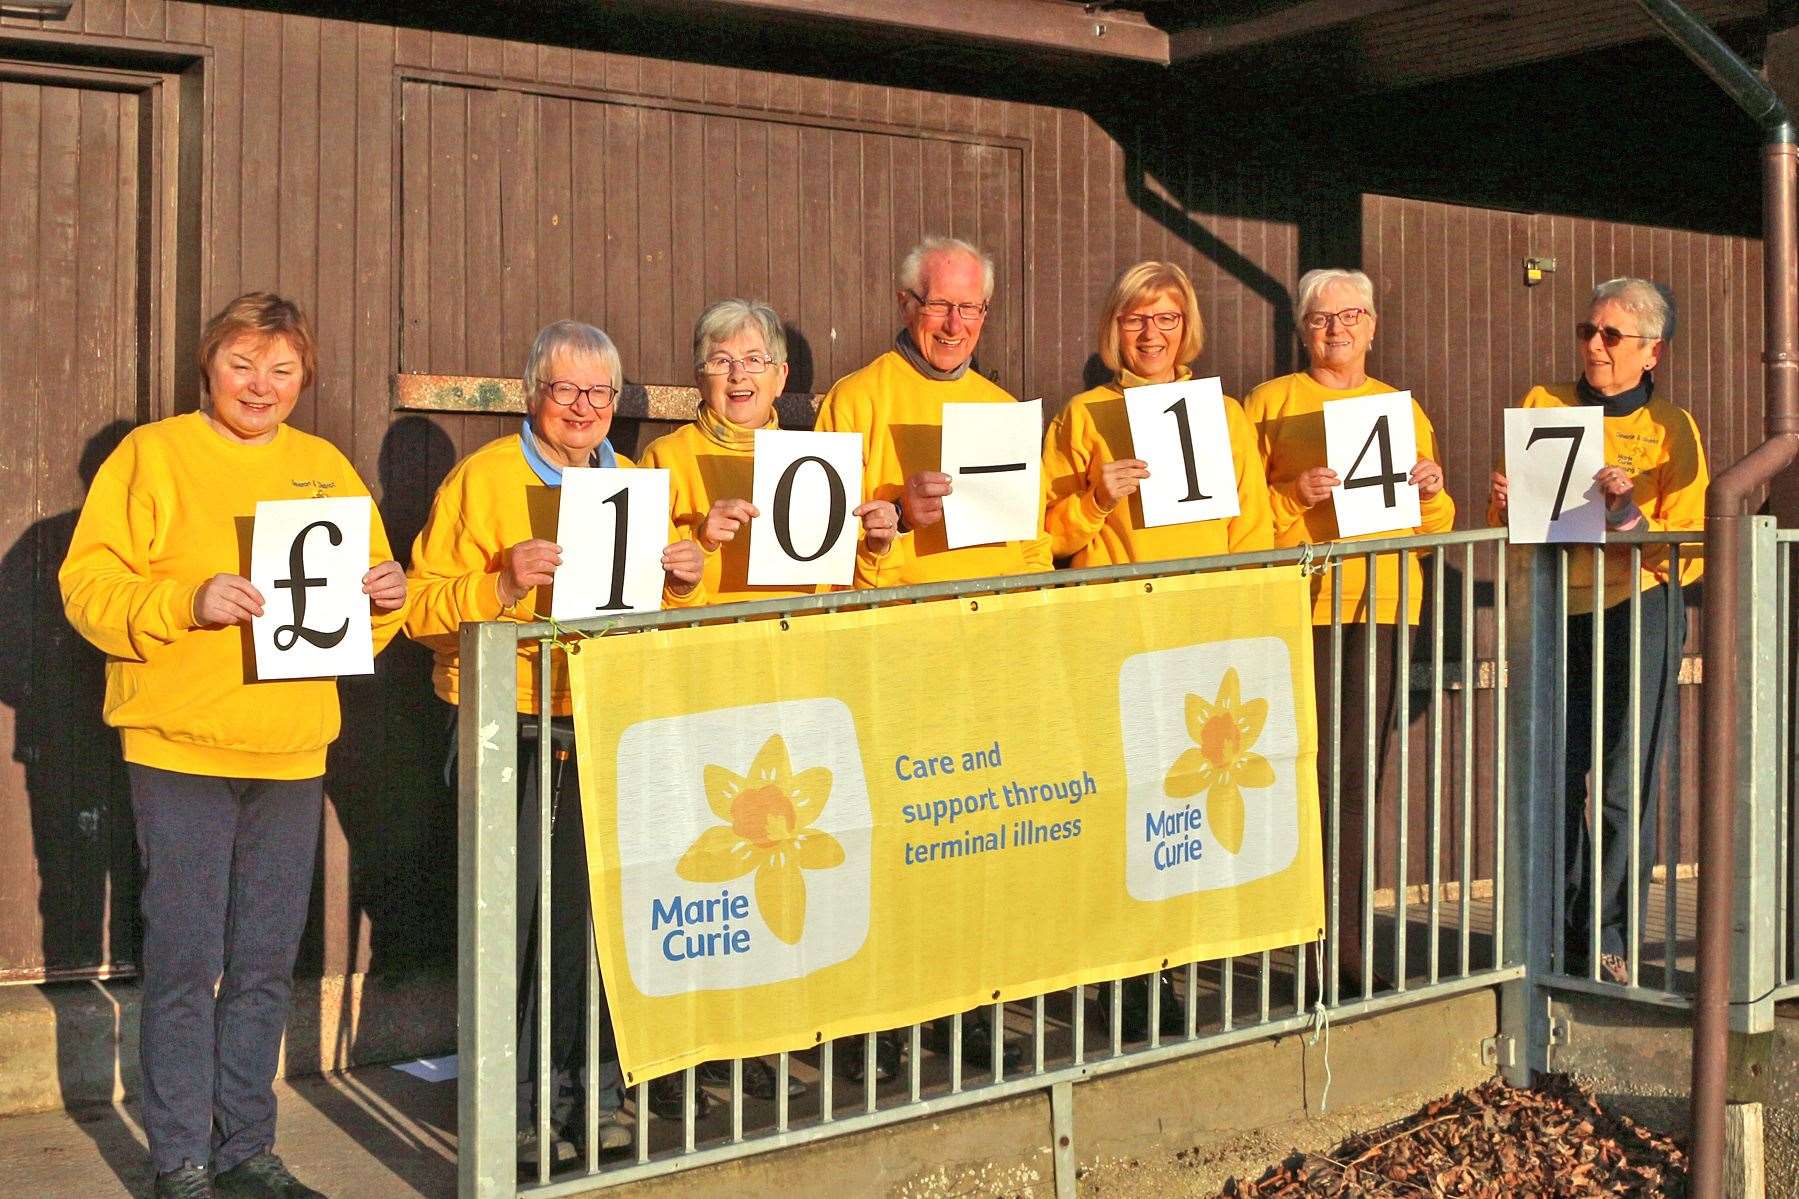 The Deveron and District fundraising group of Marie Curie raised £10,147 from the firewalking event. Picture: Andy Taylor